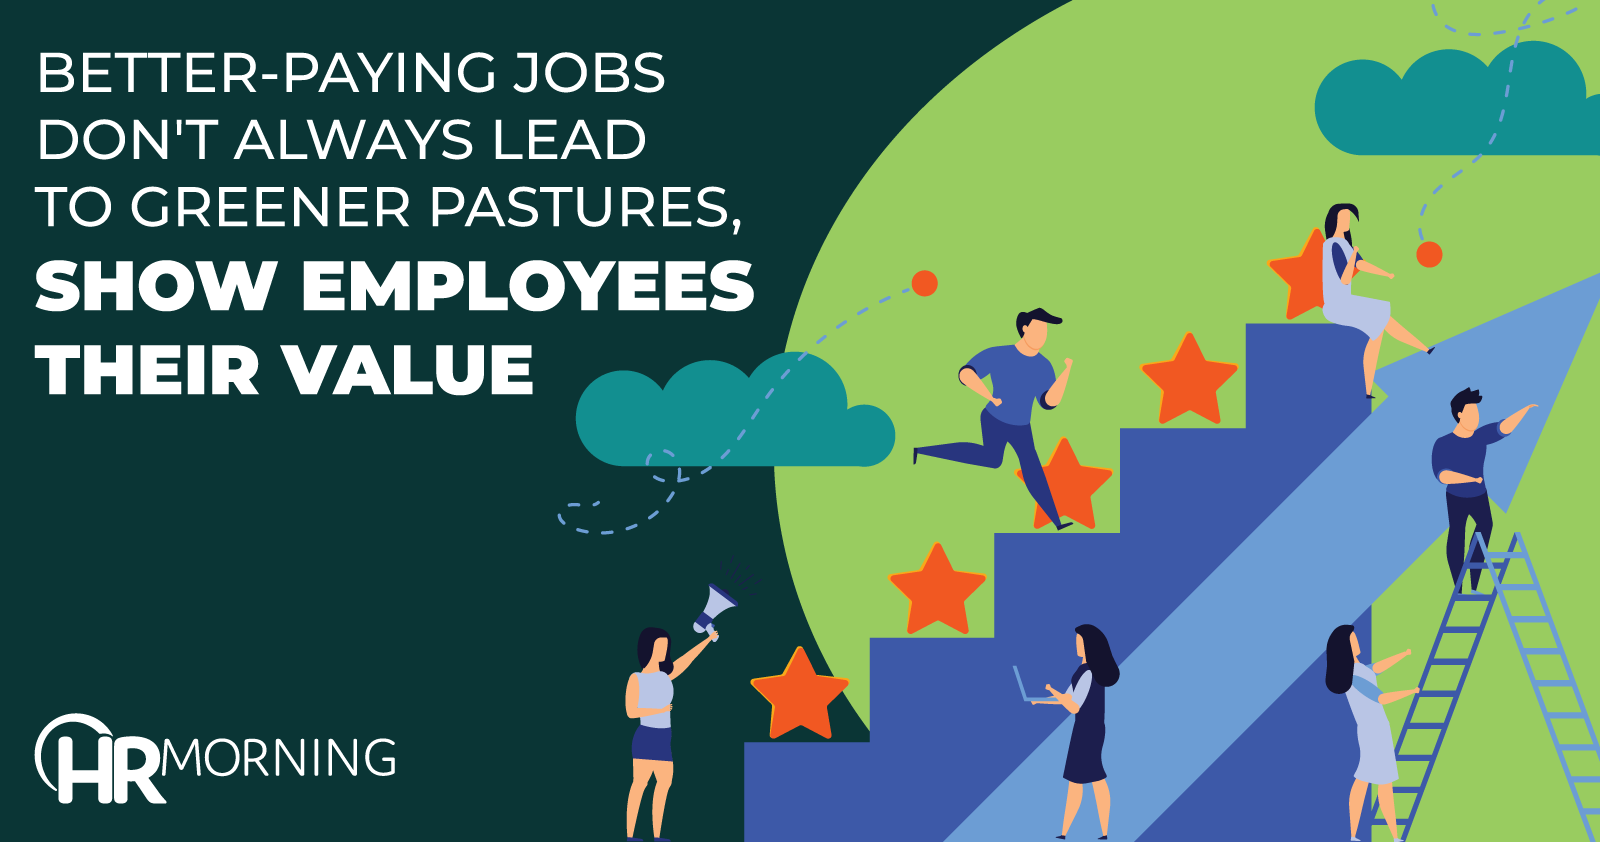 Better-paying Jobs Don't Always Lead to Greener Pastures, Show Employees Their Value